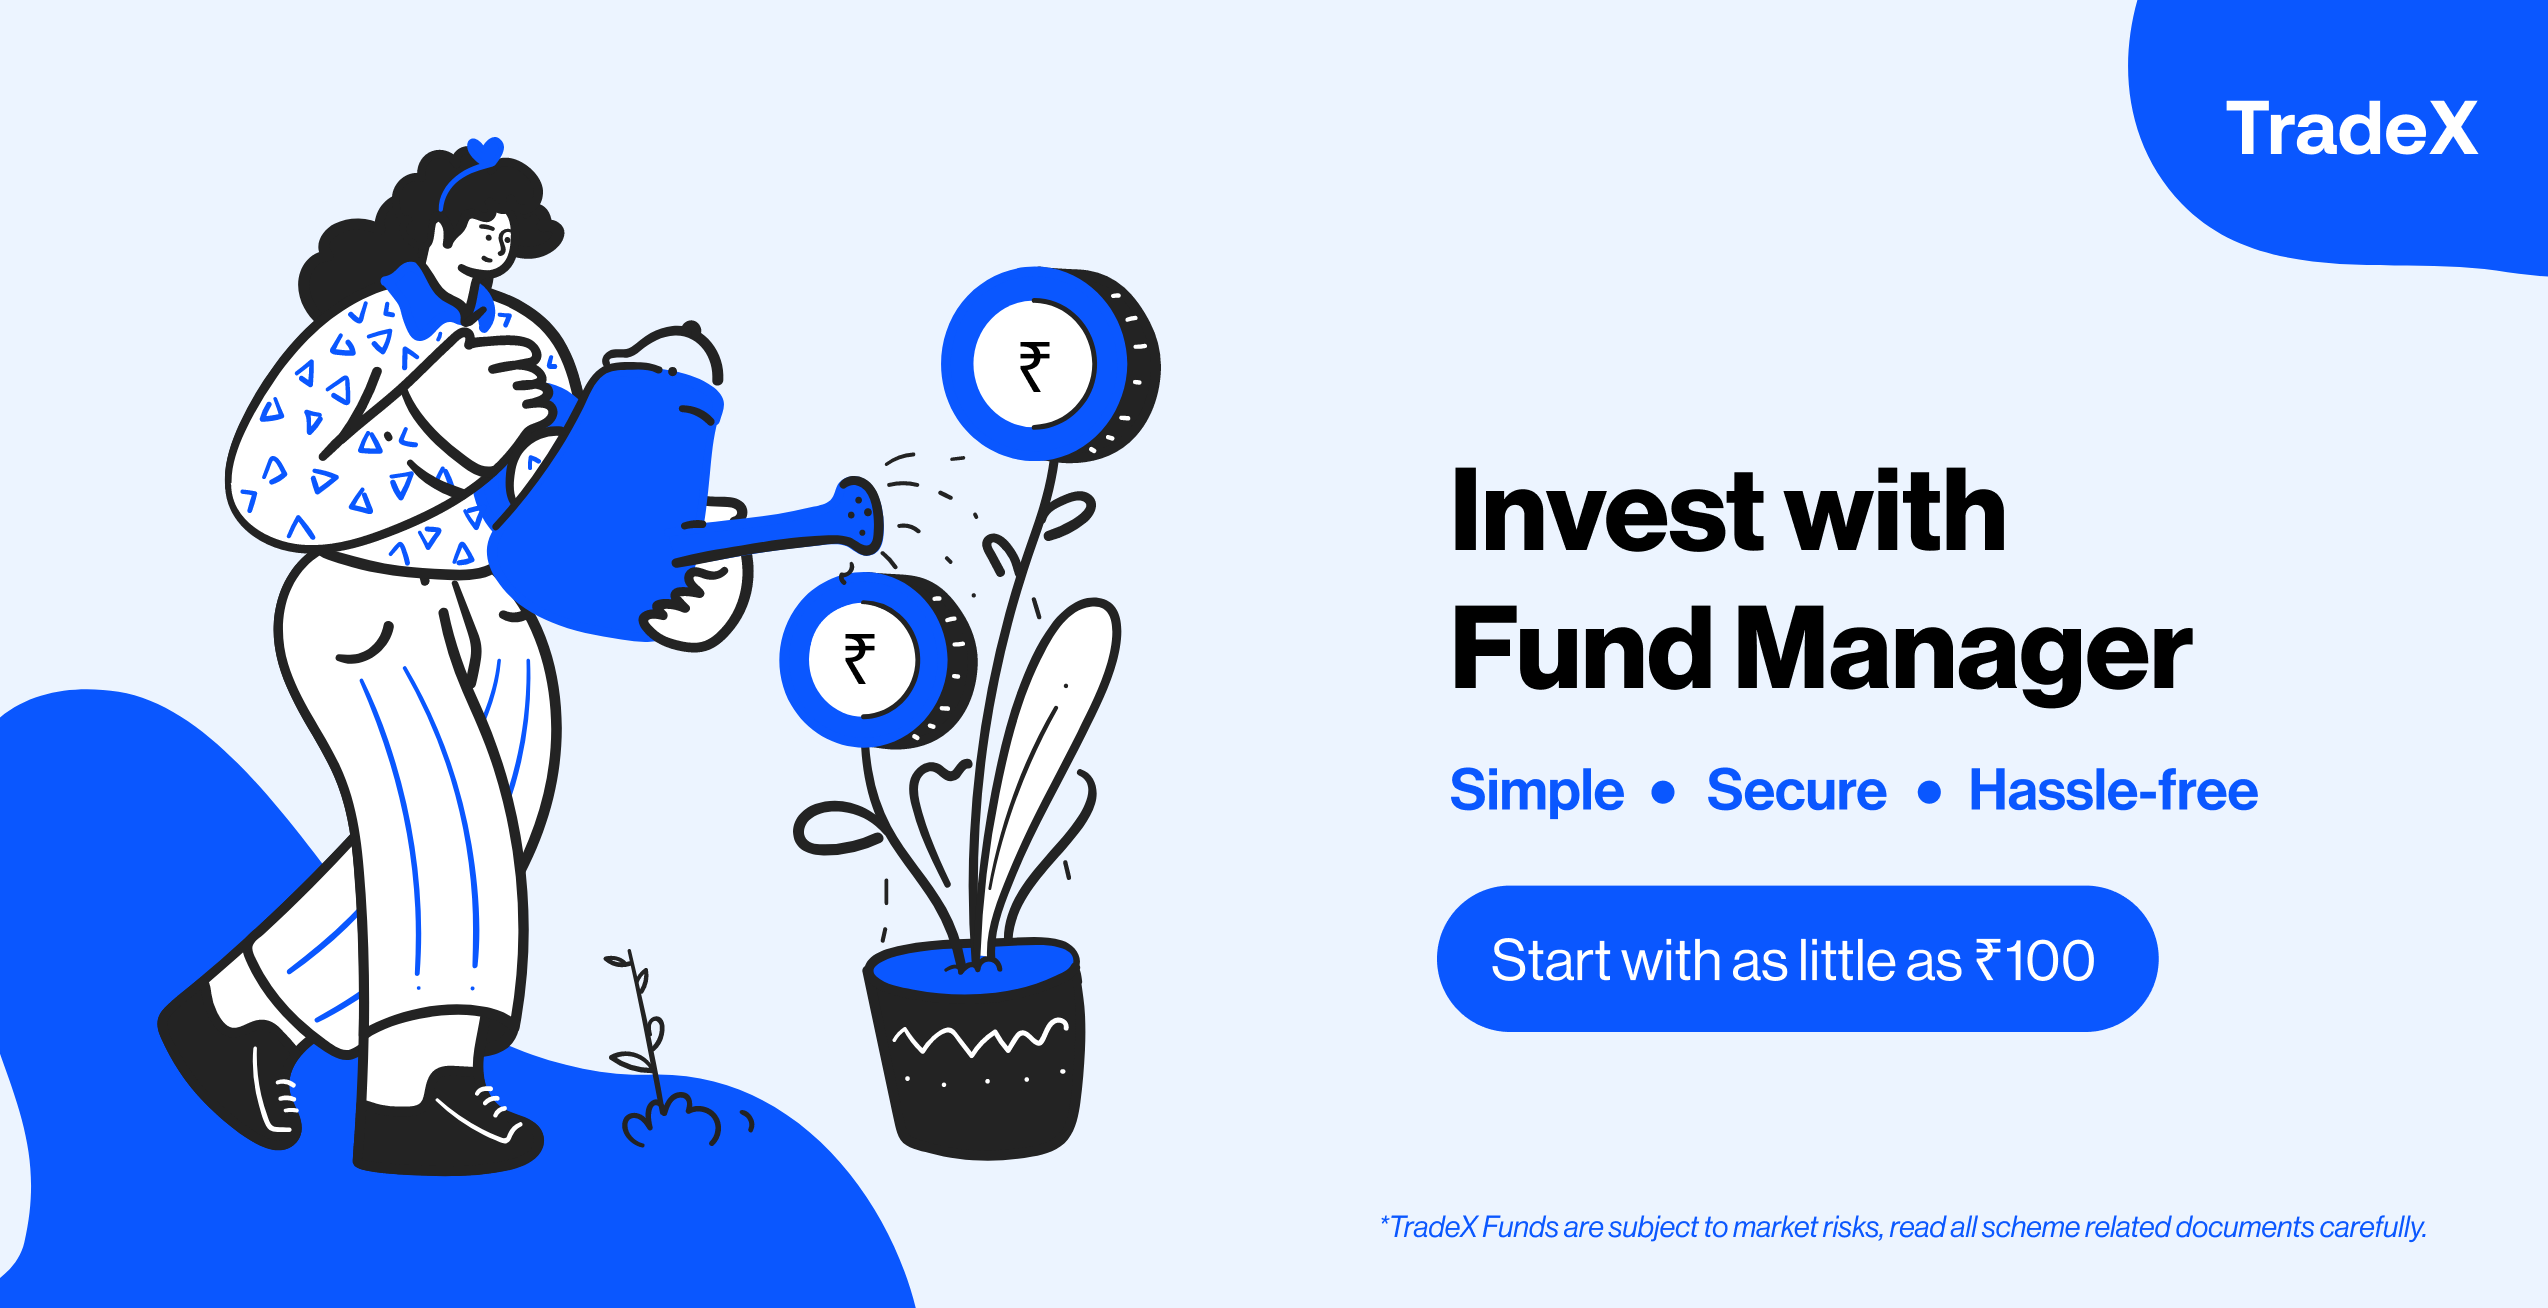 Invest with Fund Manager